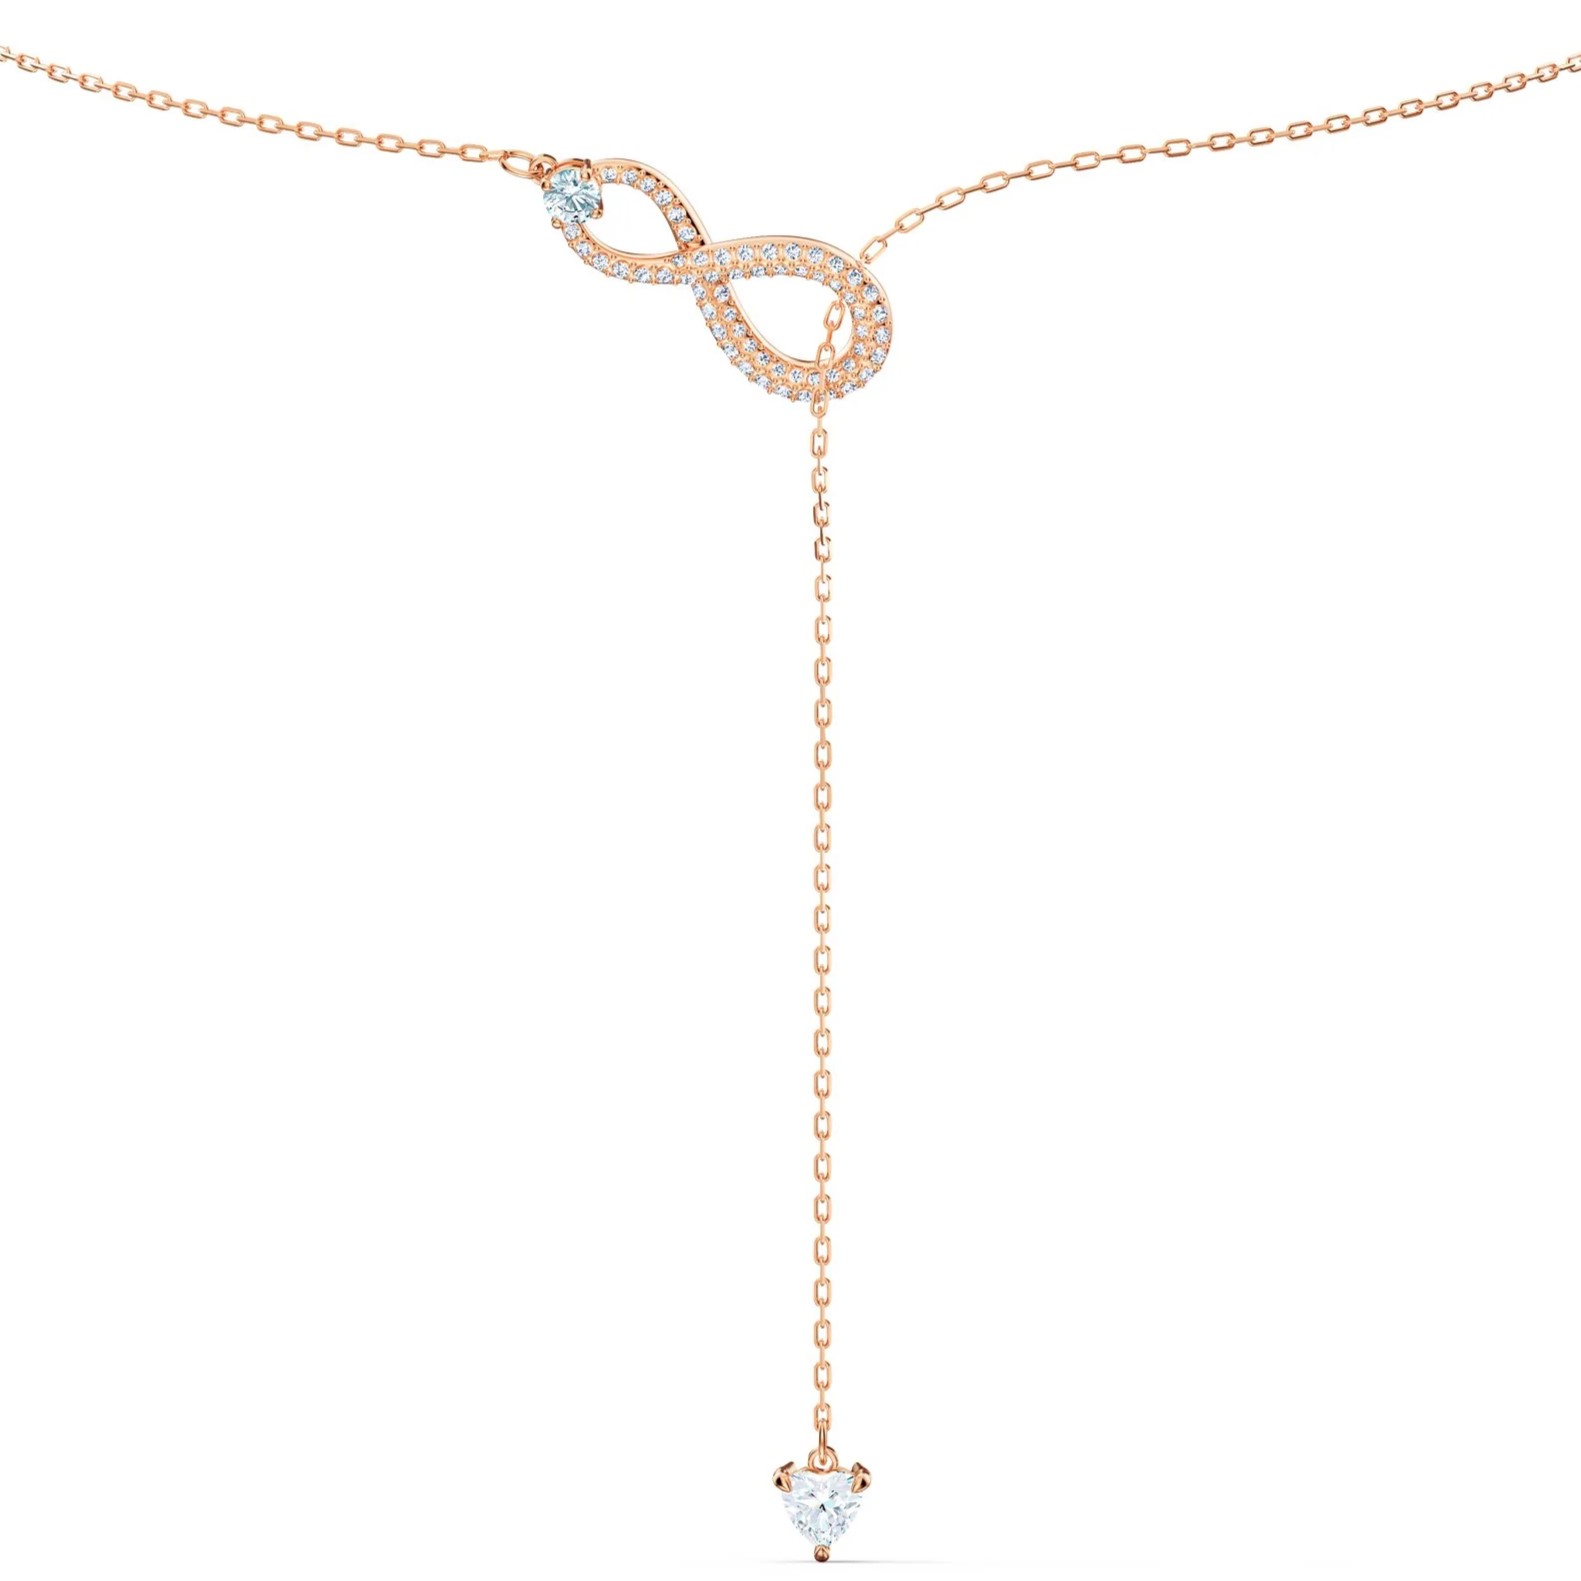 DÂY CHUYỀN SWAROVSKI INFINITY Y NECKLACE WHITE ROSE GOLD-TONE PLATED 5521346 5